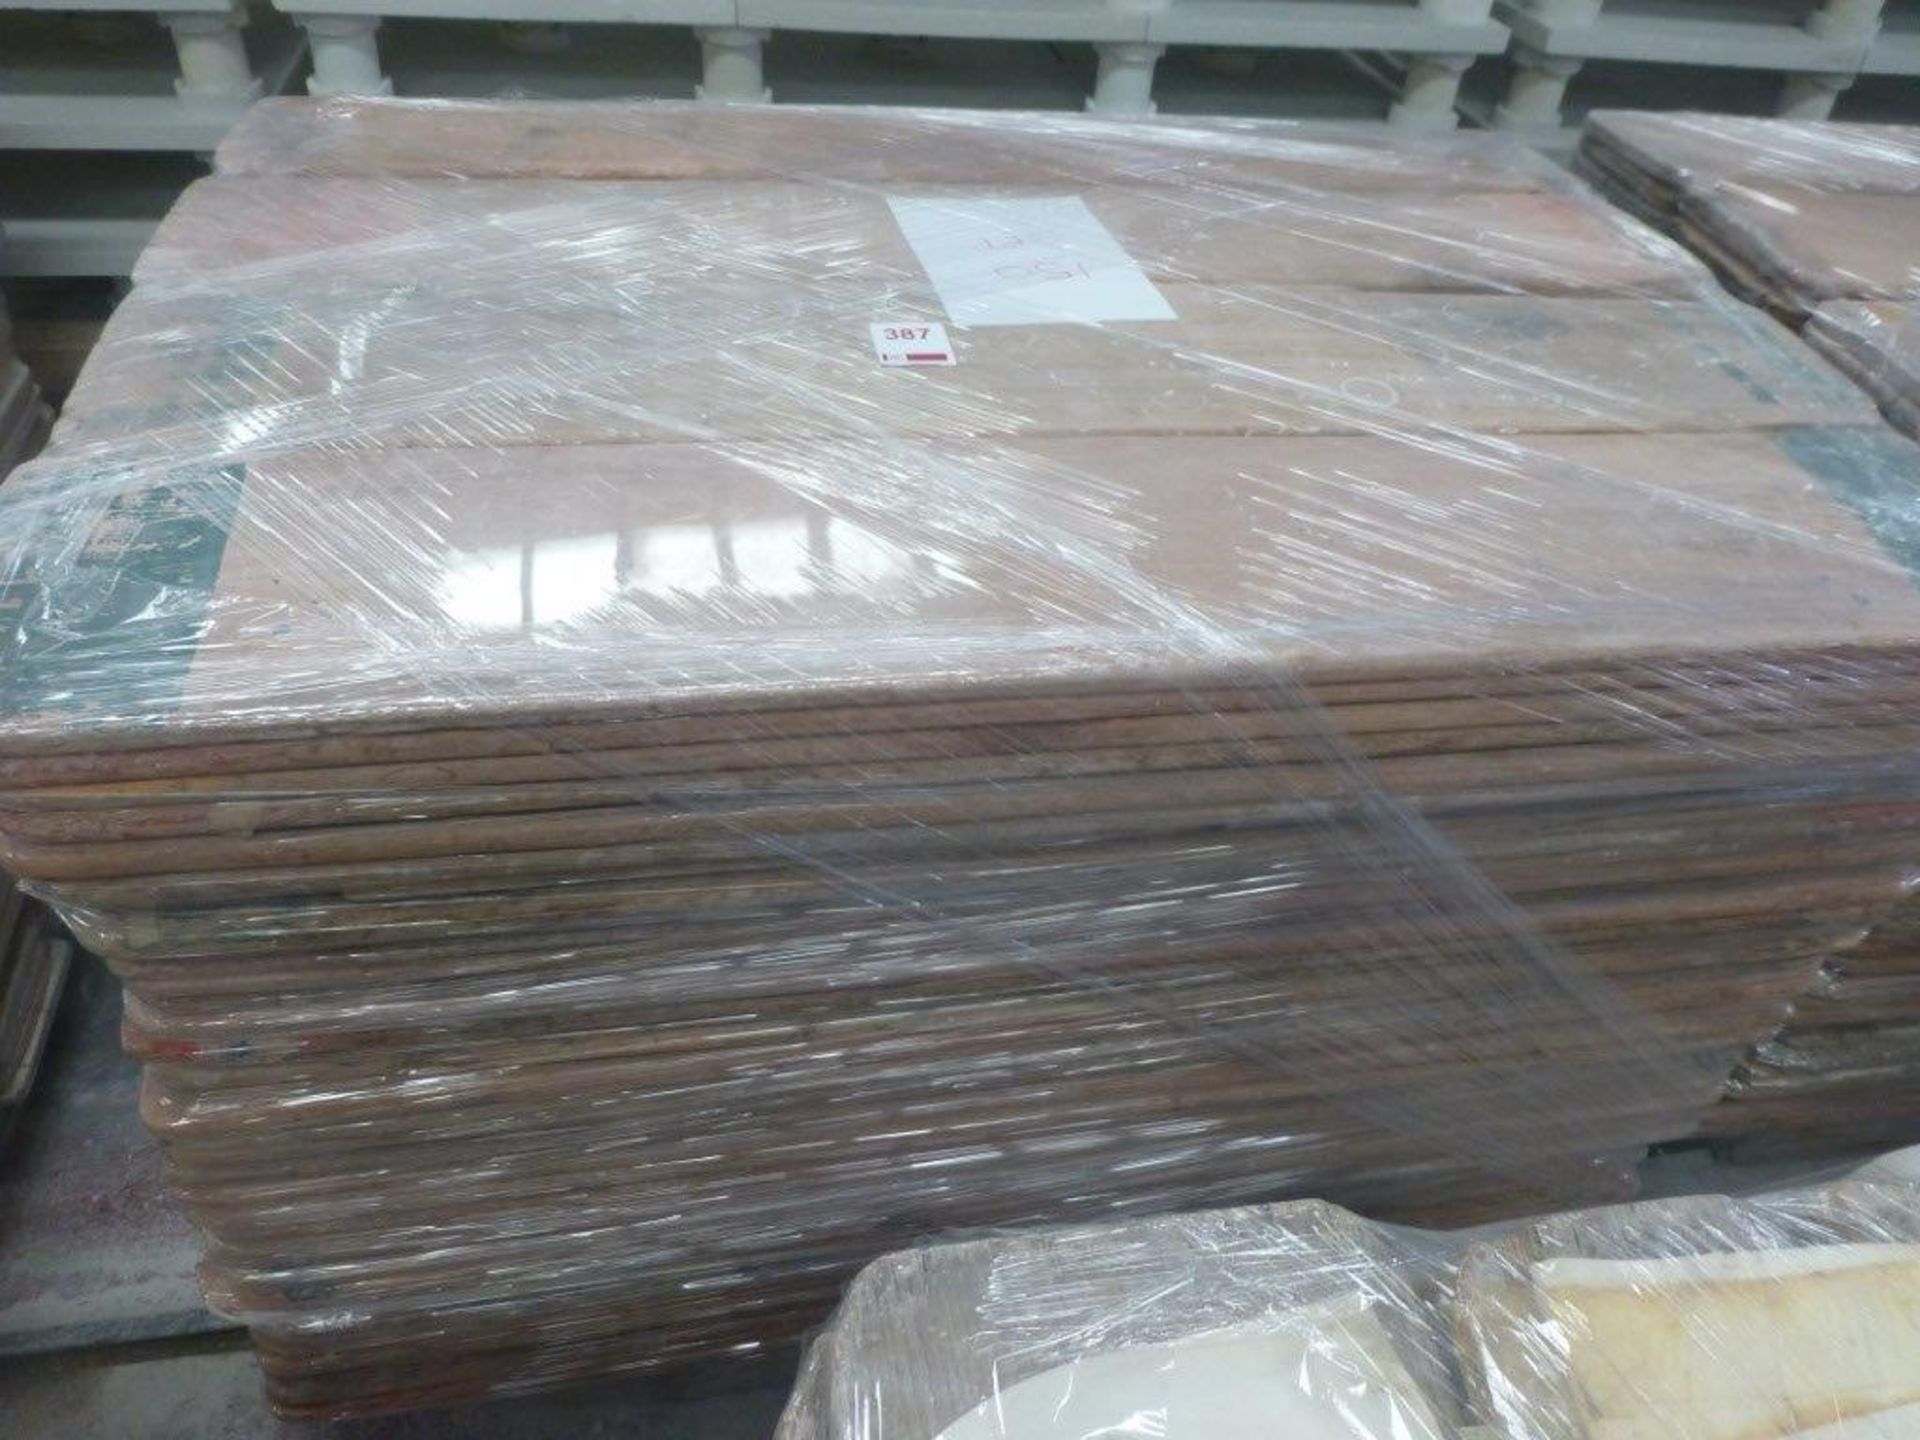 150 x 5' ware boards on one pallet